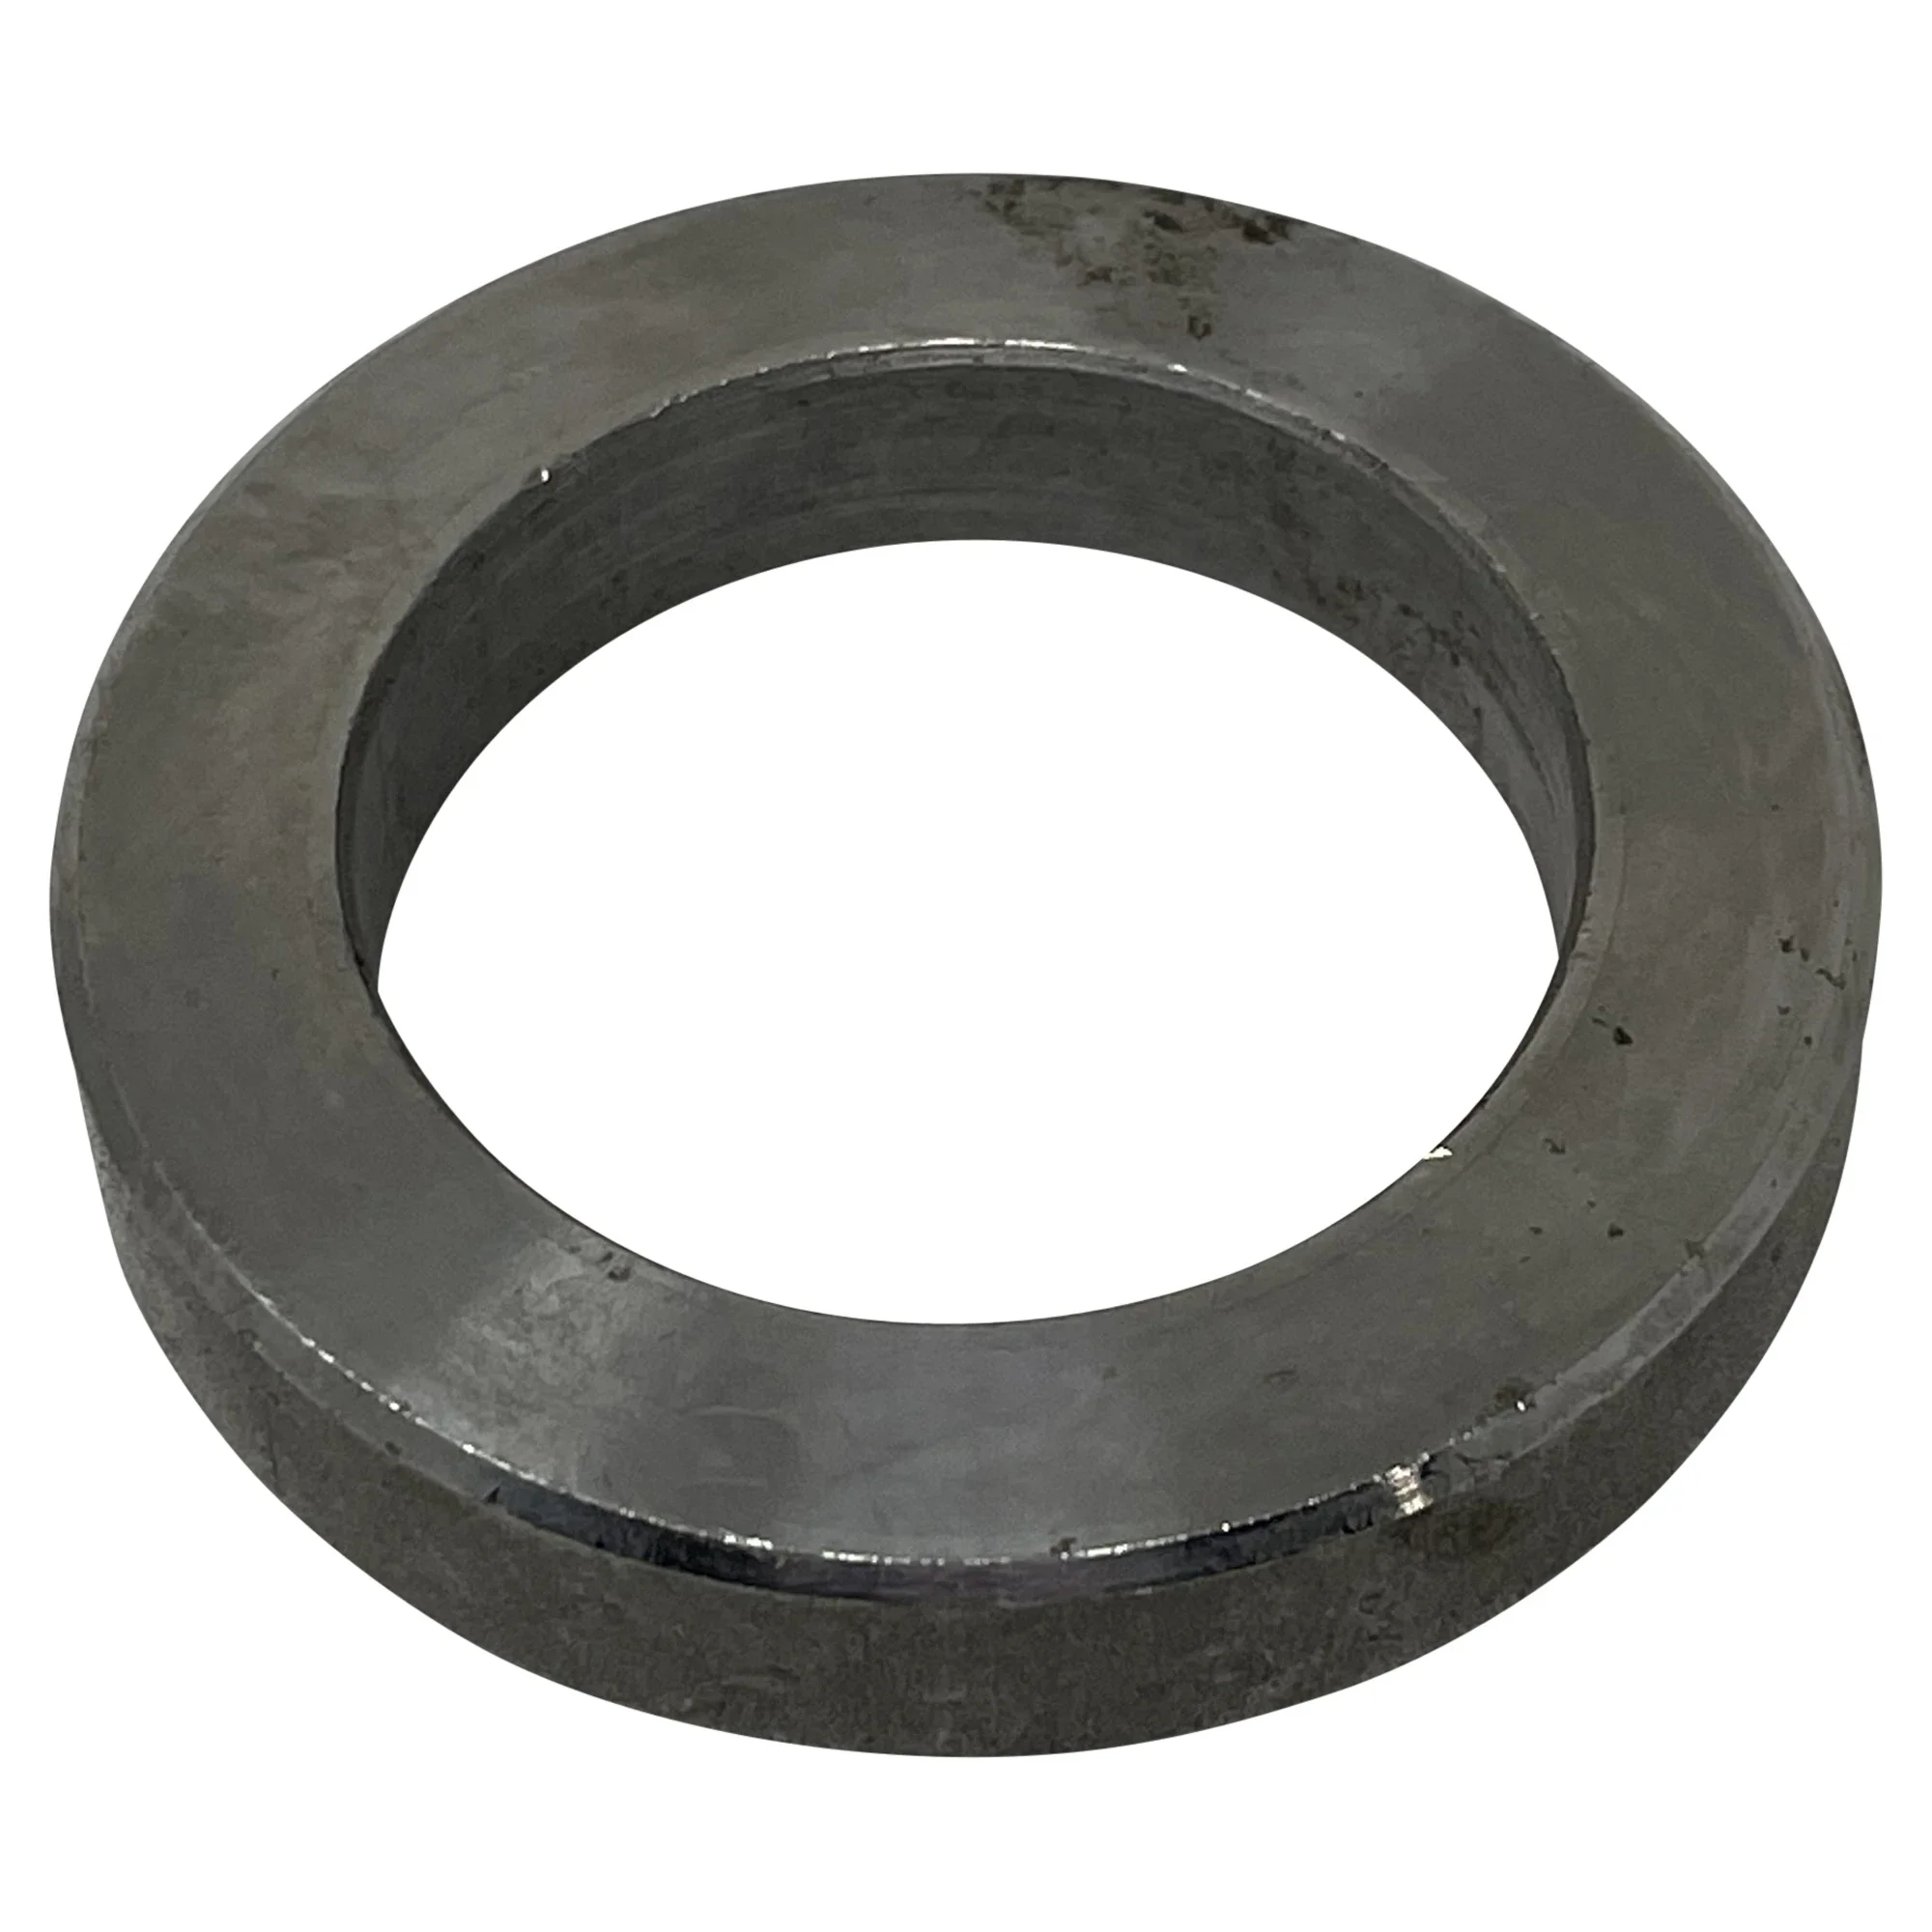 Wastebuilt® Replacement for McNeilus Spacer-1-1/2"Bearing